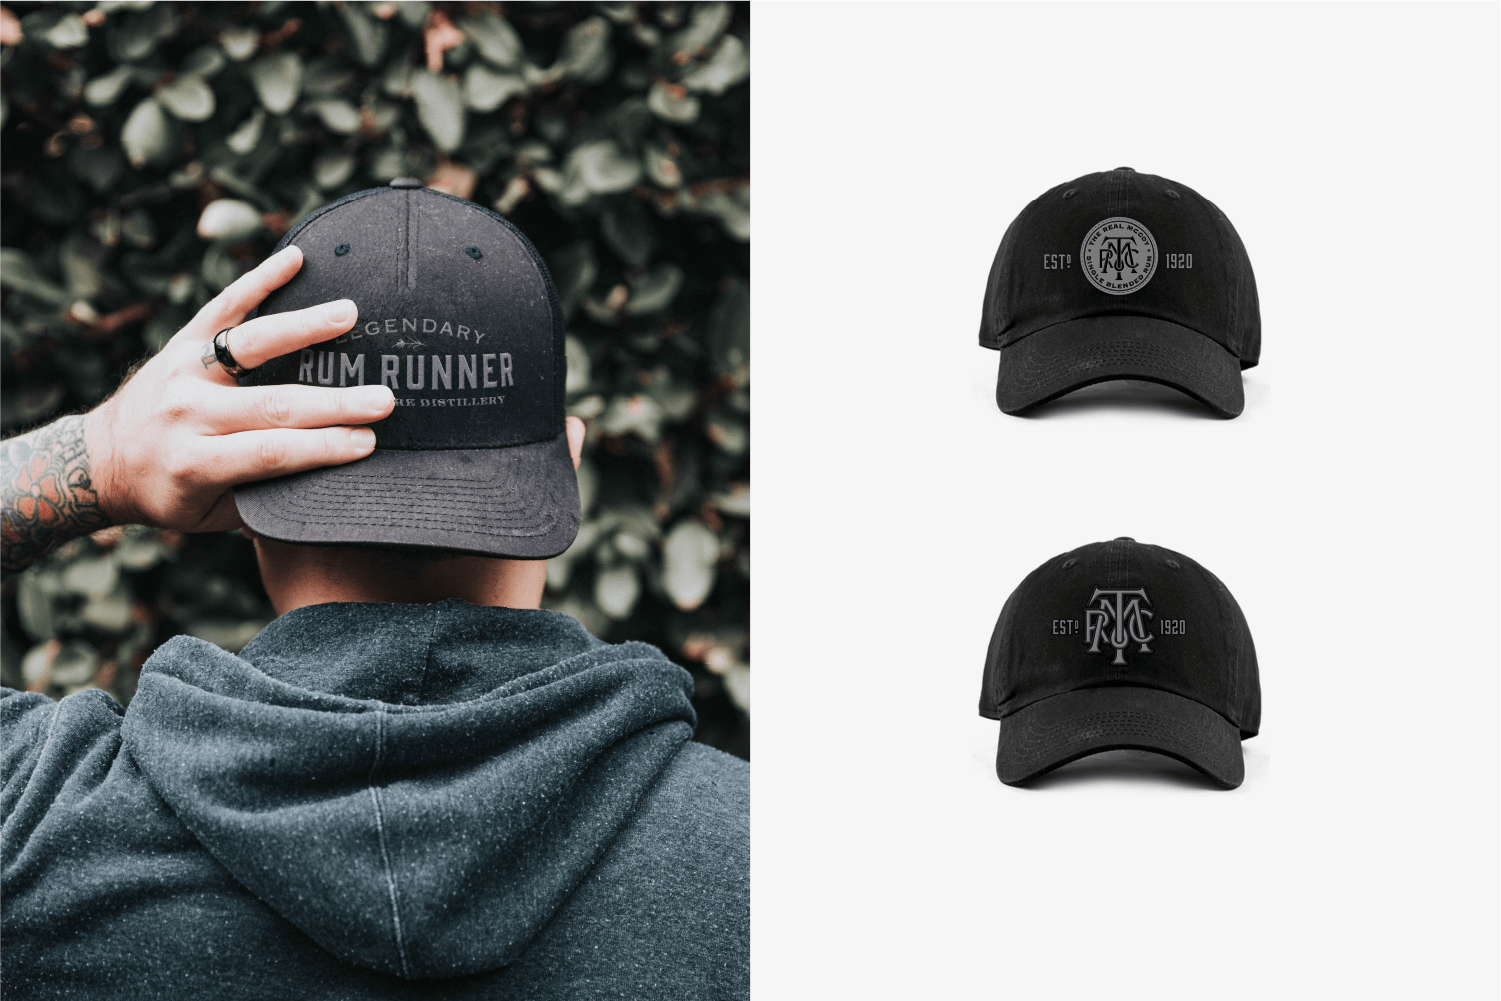 The Real McCoy, Legendary Rum Runner Hats with embroidered logo.